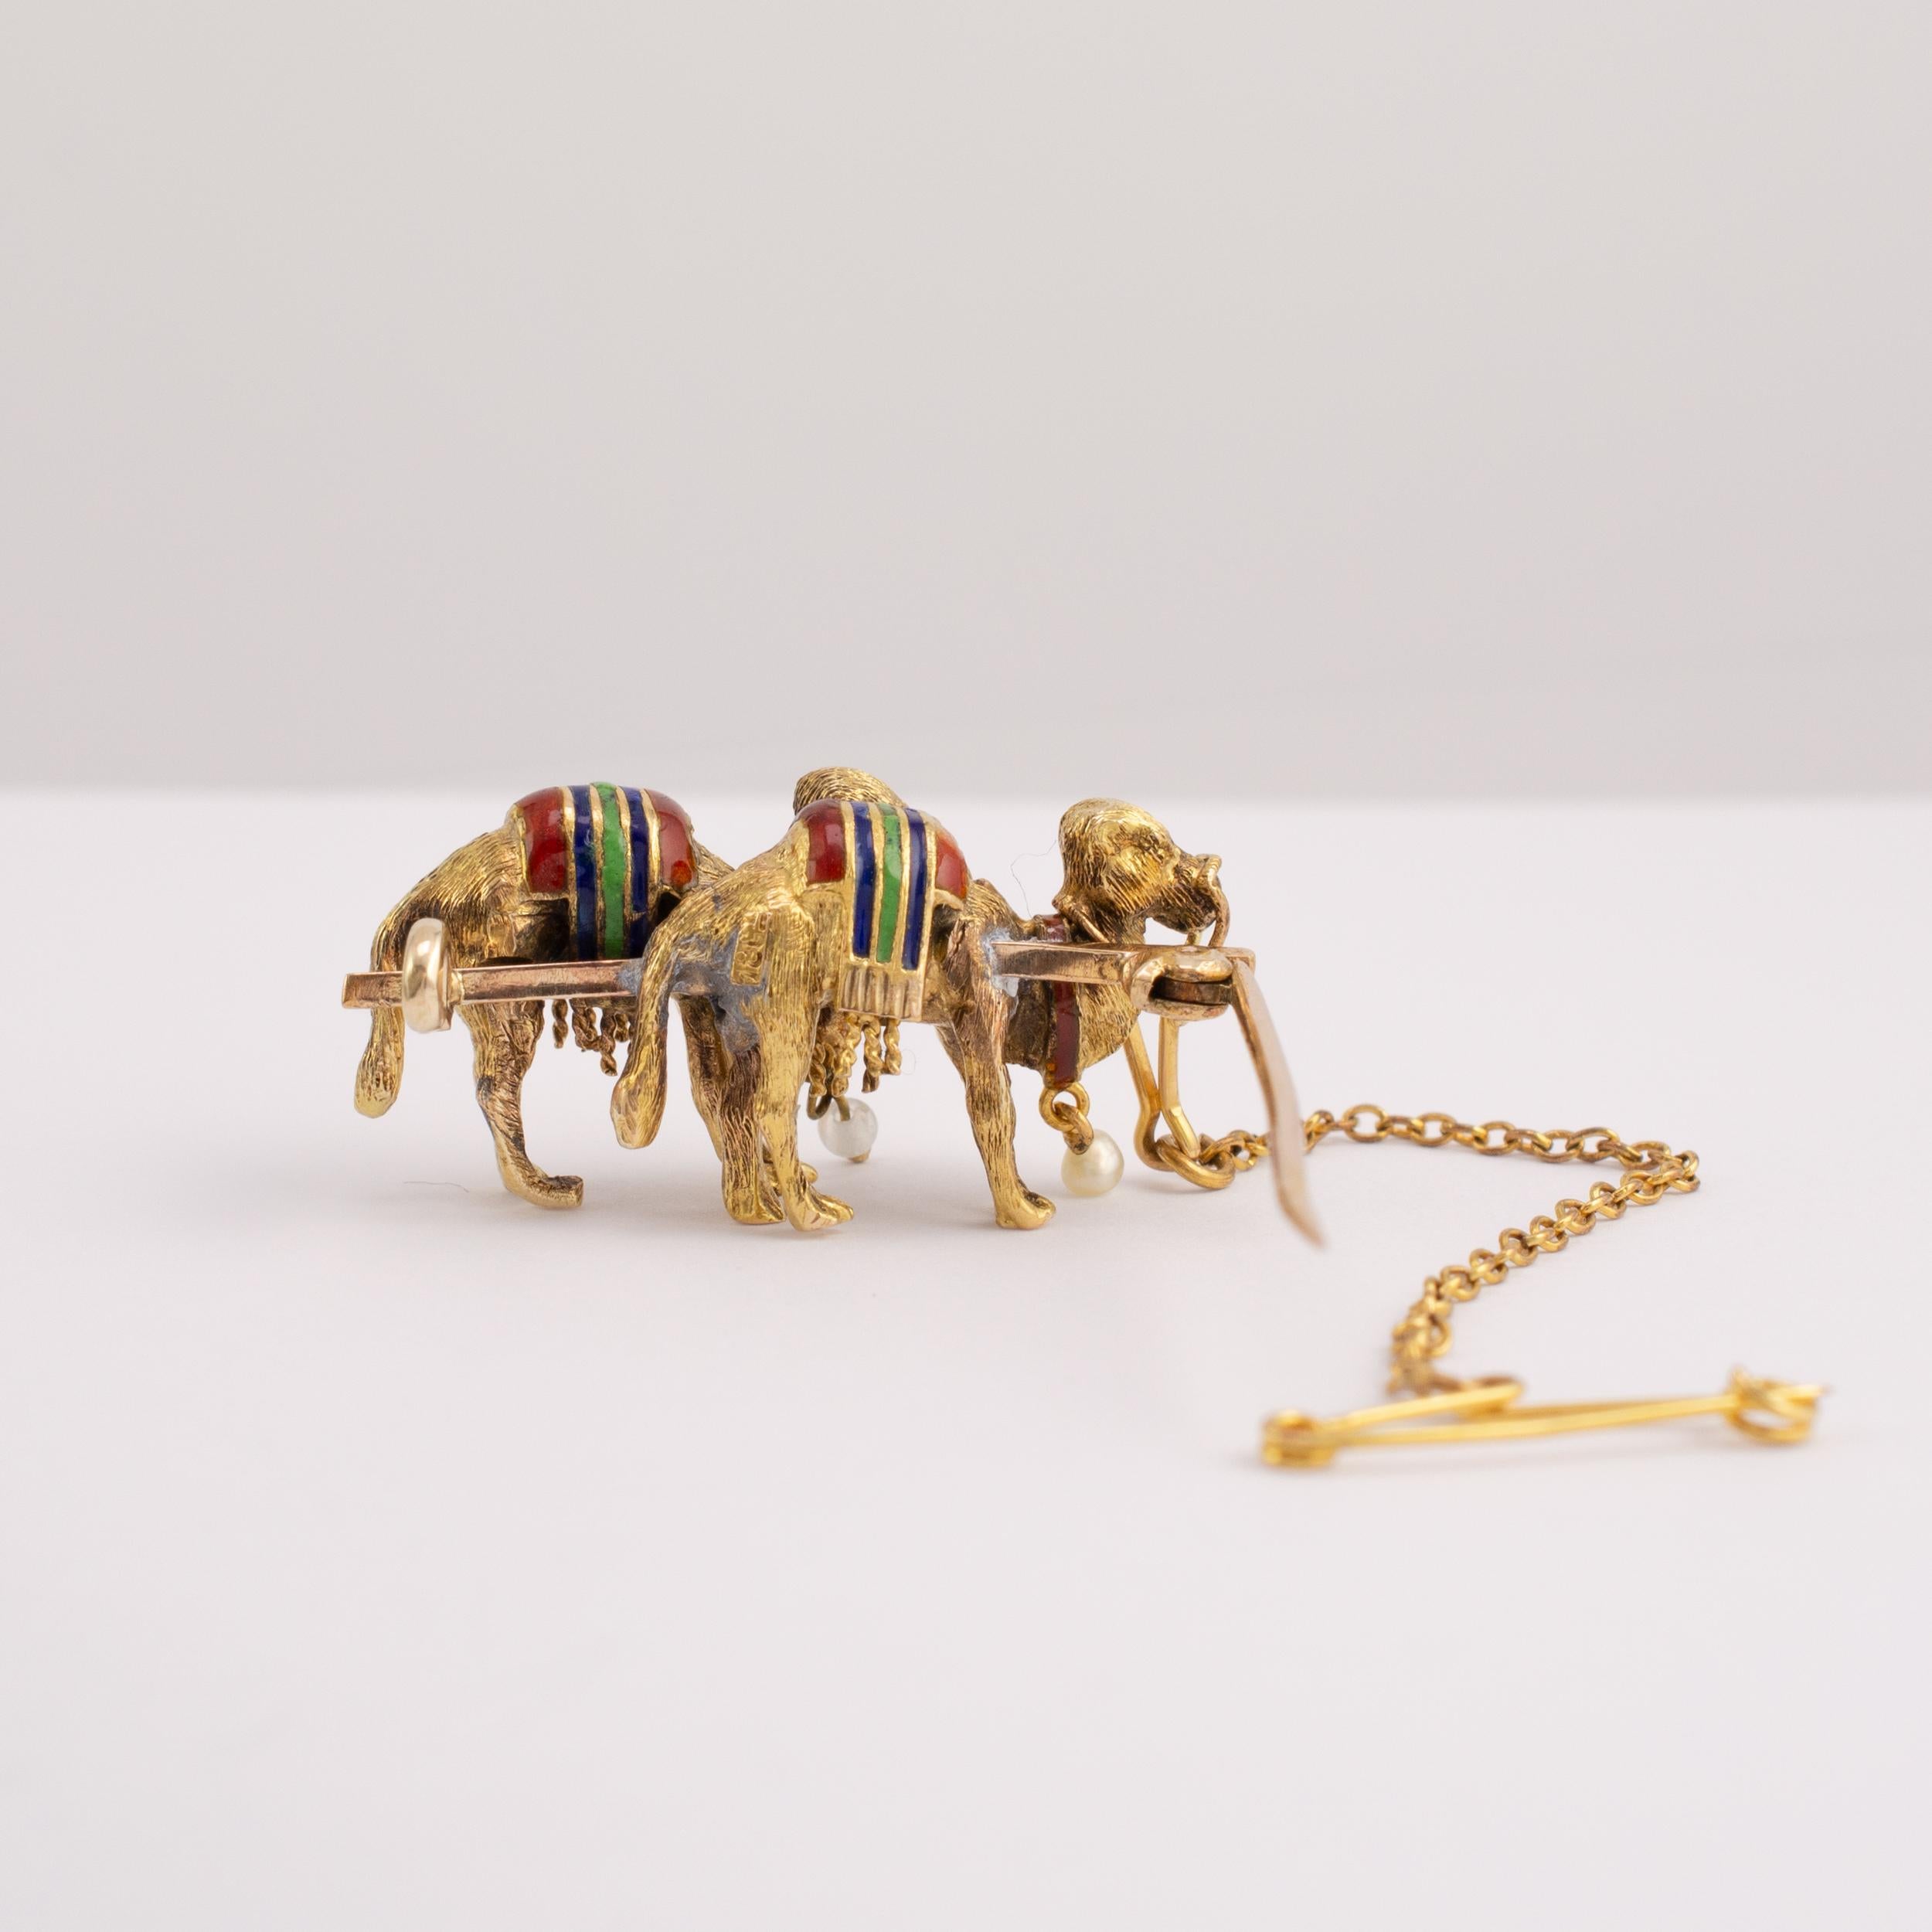 Vintage 18 karat gold camel brooch with pearl drop and enamel decoration, Circa 1940s.

The camels are finely detailed with a textured finish. Each camel is decorated with red green and blue striped enamel rug seat with gold tassels. Under one camel